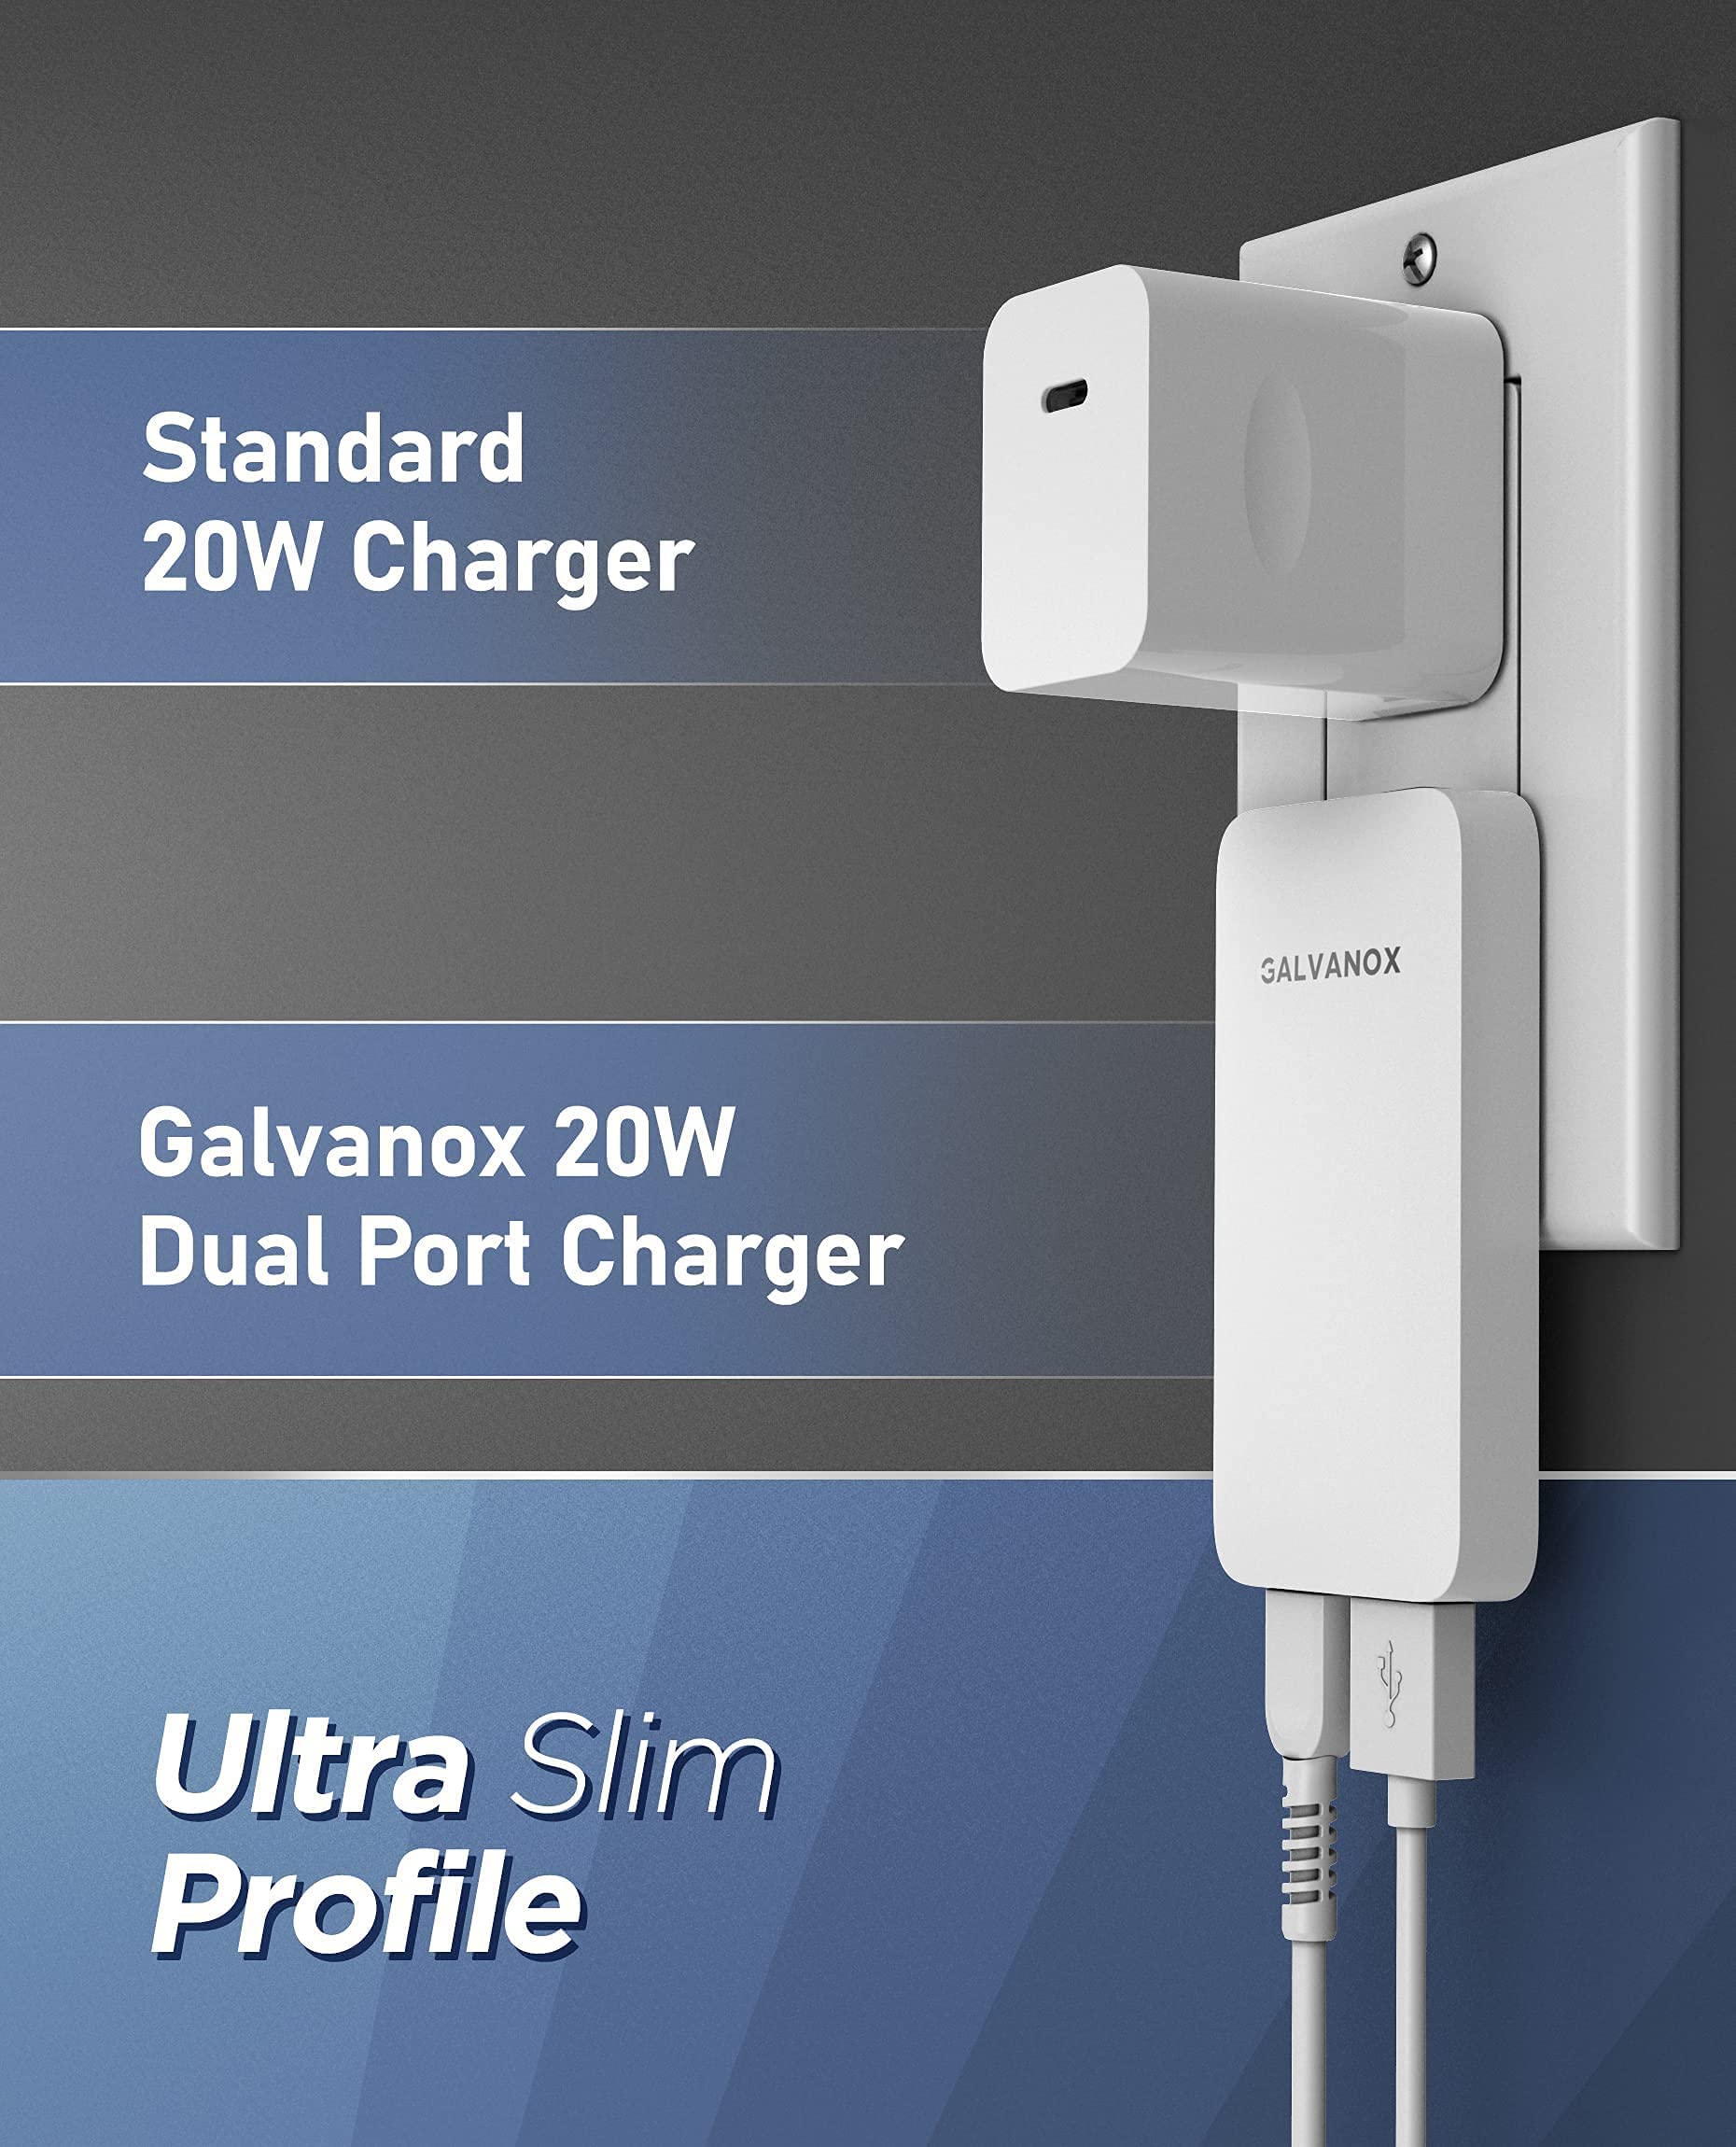 Type C Flat Wall Charger, Galvanox Ultra Slim (Multi-Port Power Adapter) for iPhone 11/12/13 iPhone 14 Pro/Max and Samsung Galaxy Models, 20W Fast Charging Outlet Plug - 3 Pack (Dual USB-C USB-A)